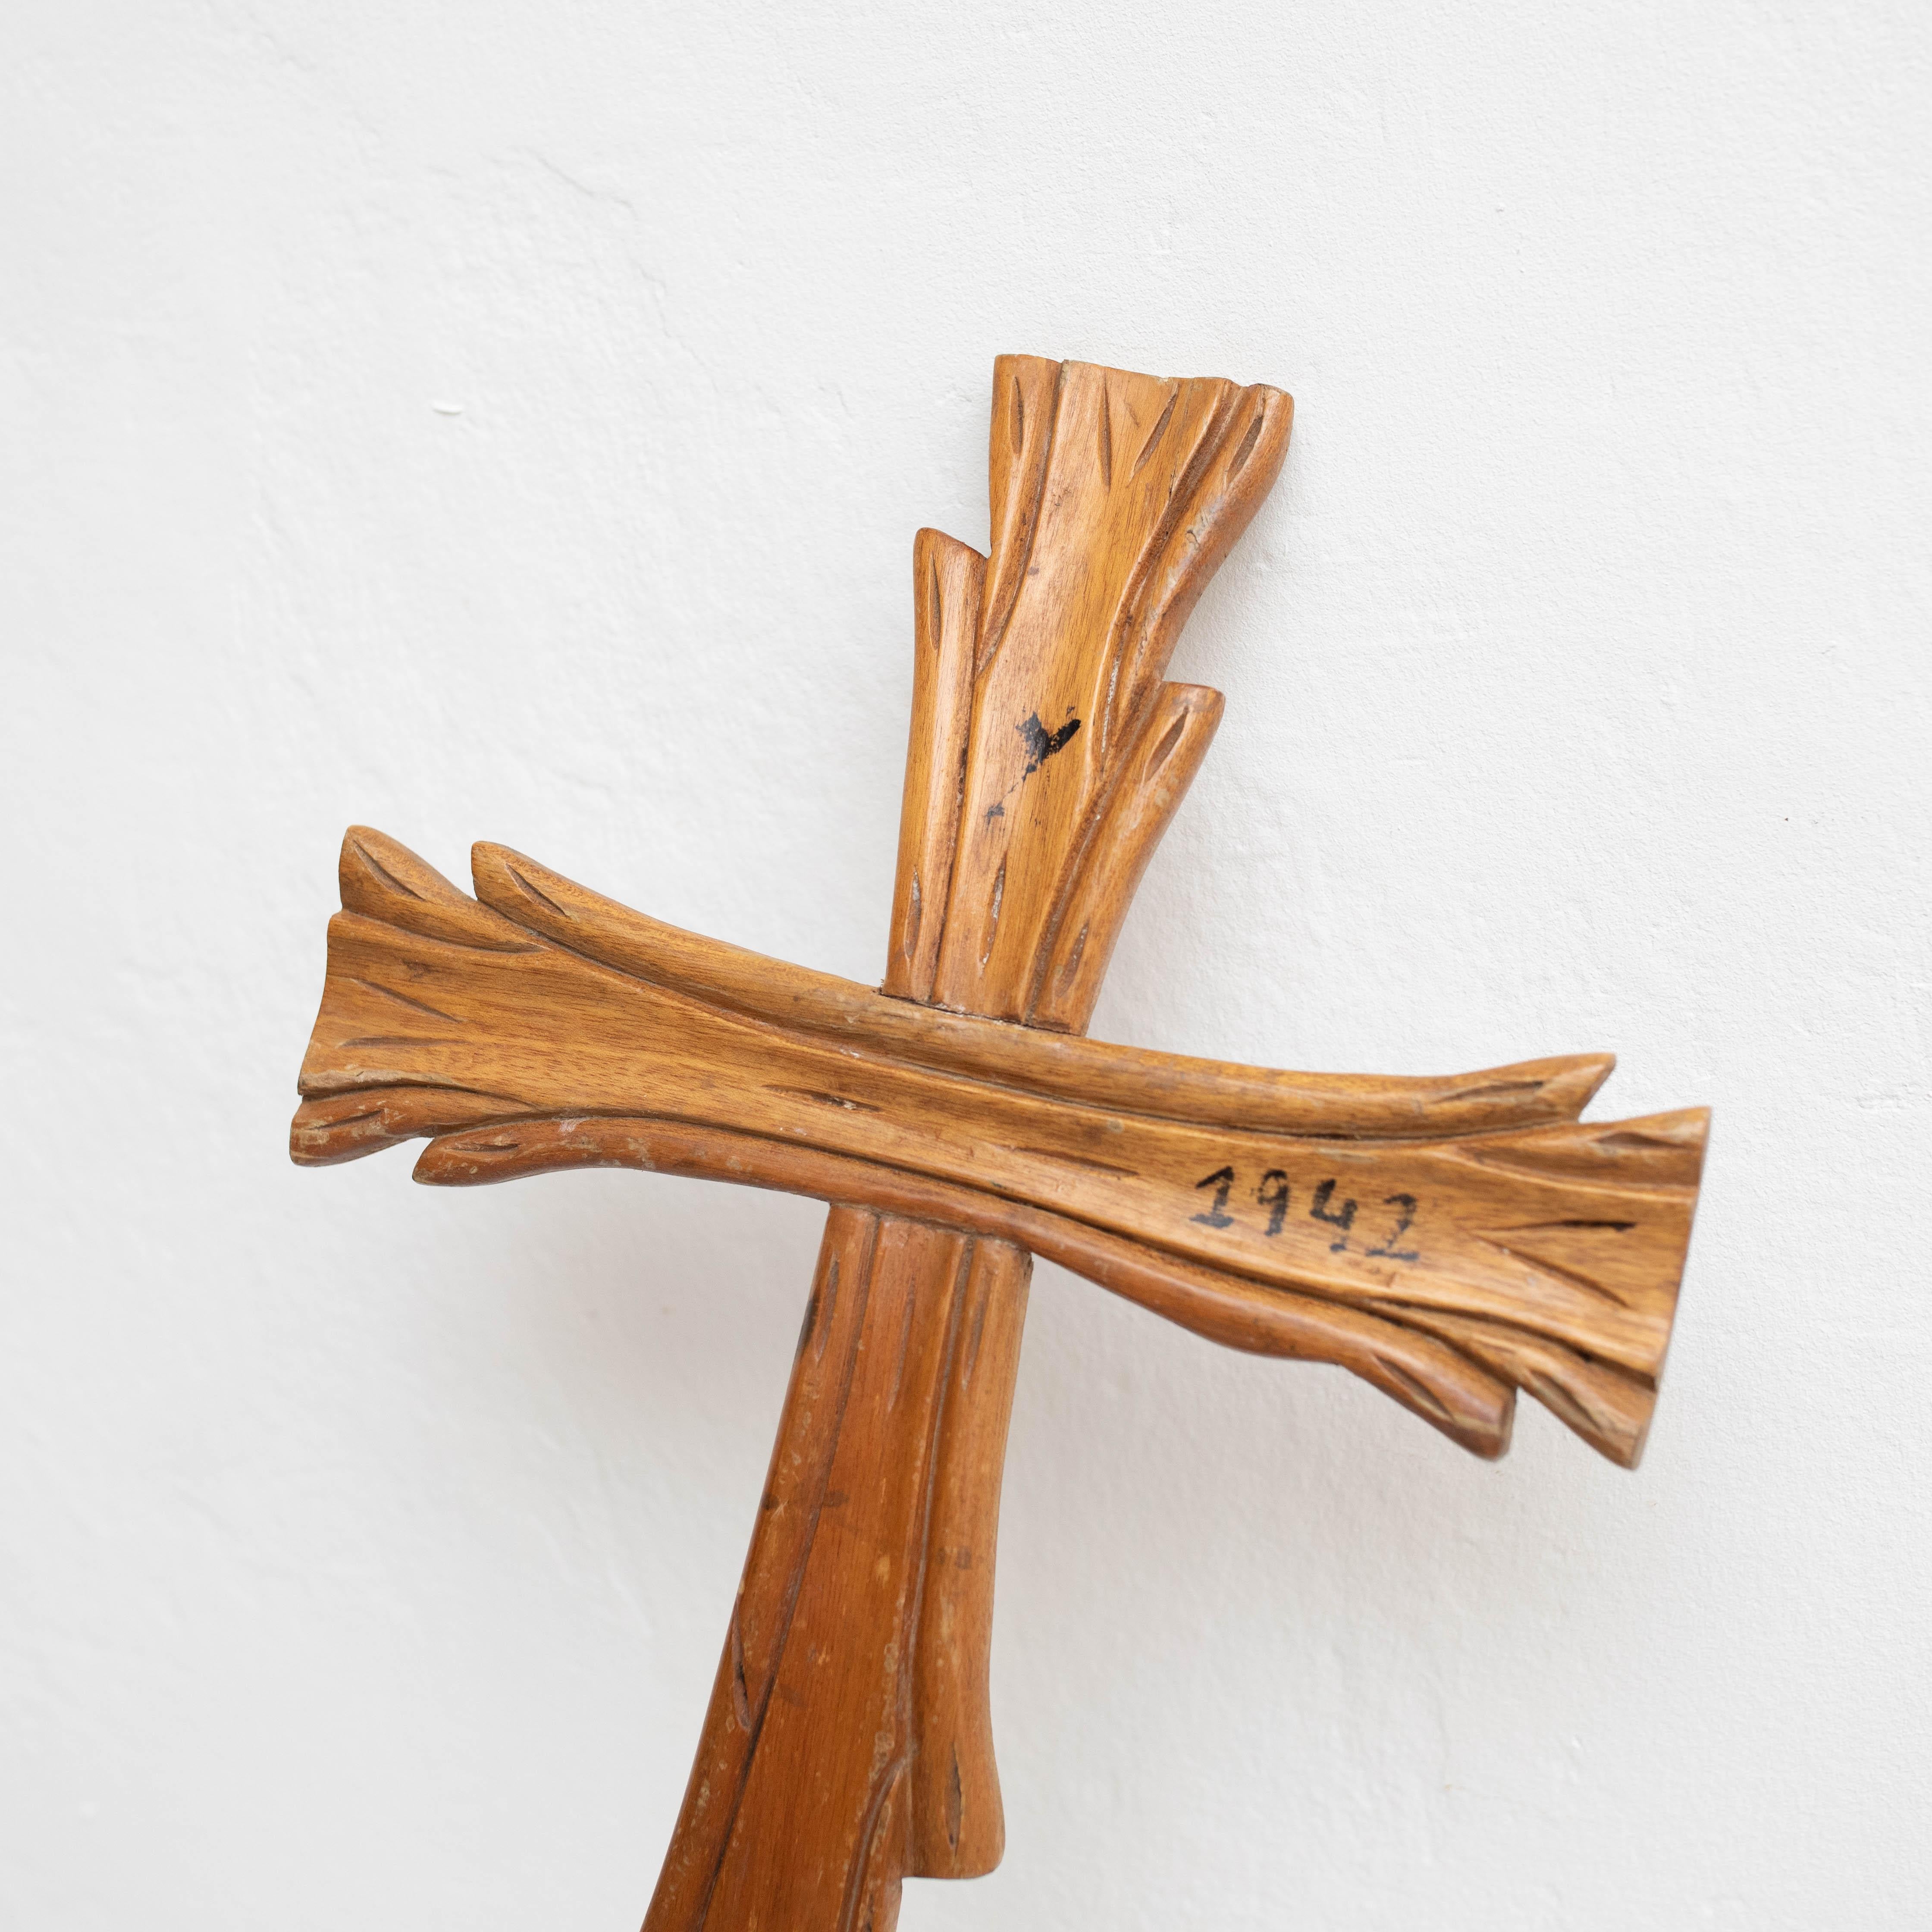 Plaster Wooden Religious Cross Traditional Artwork, circa 1950 For Sale